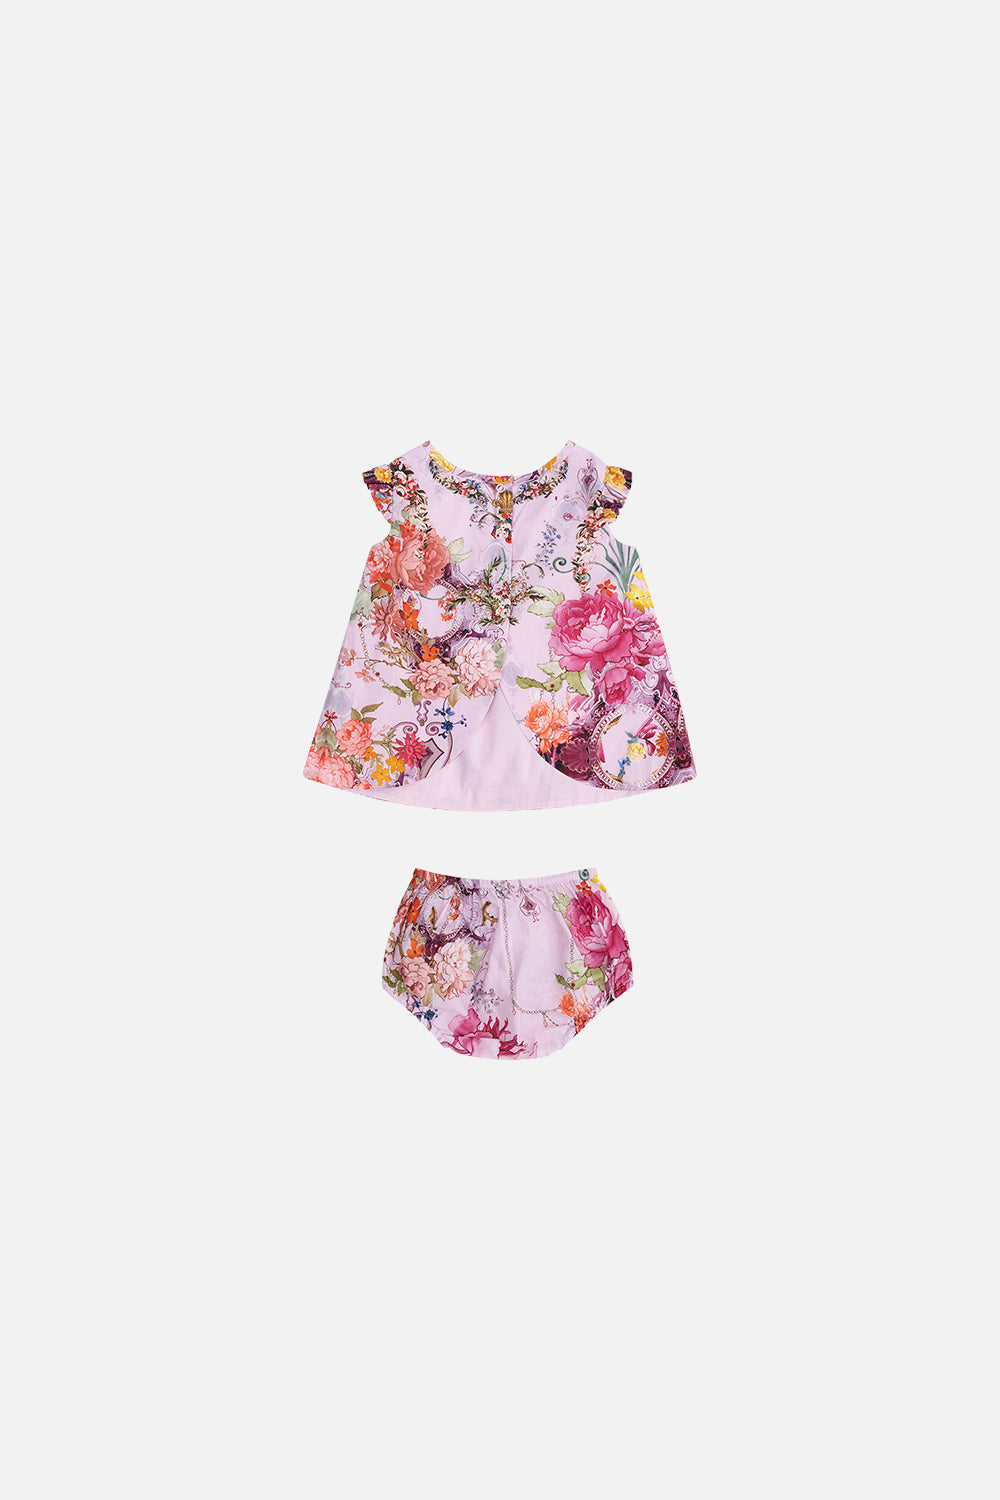 BABIES TOP AND BLOOMER SET ST GERMAINS GIRL